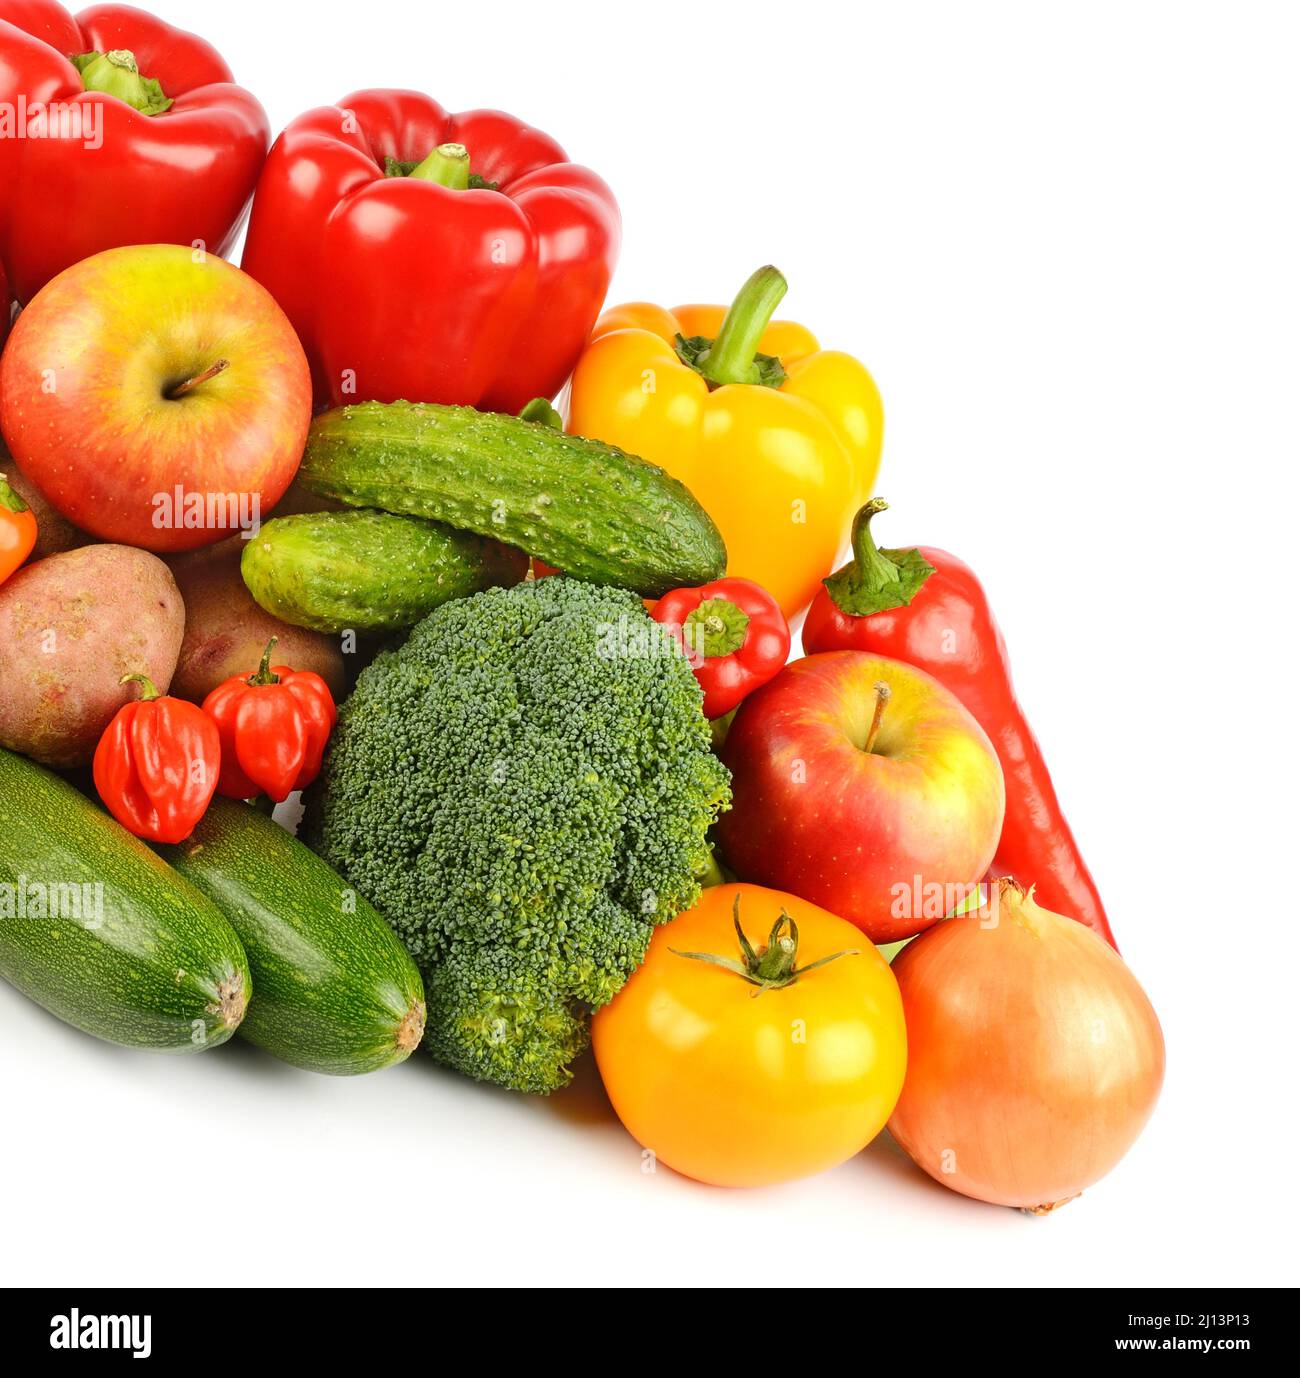 Composition of fresh vegetables and fruits isolated on white background. Stock Photo